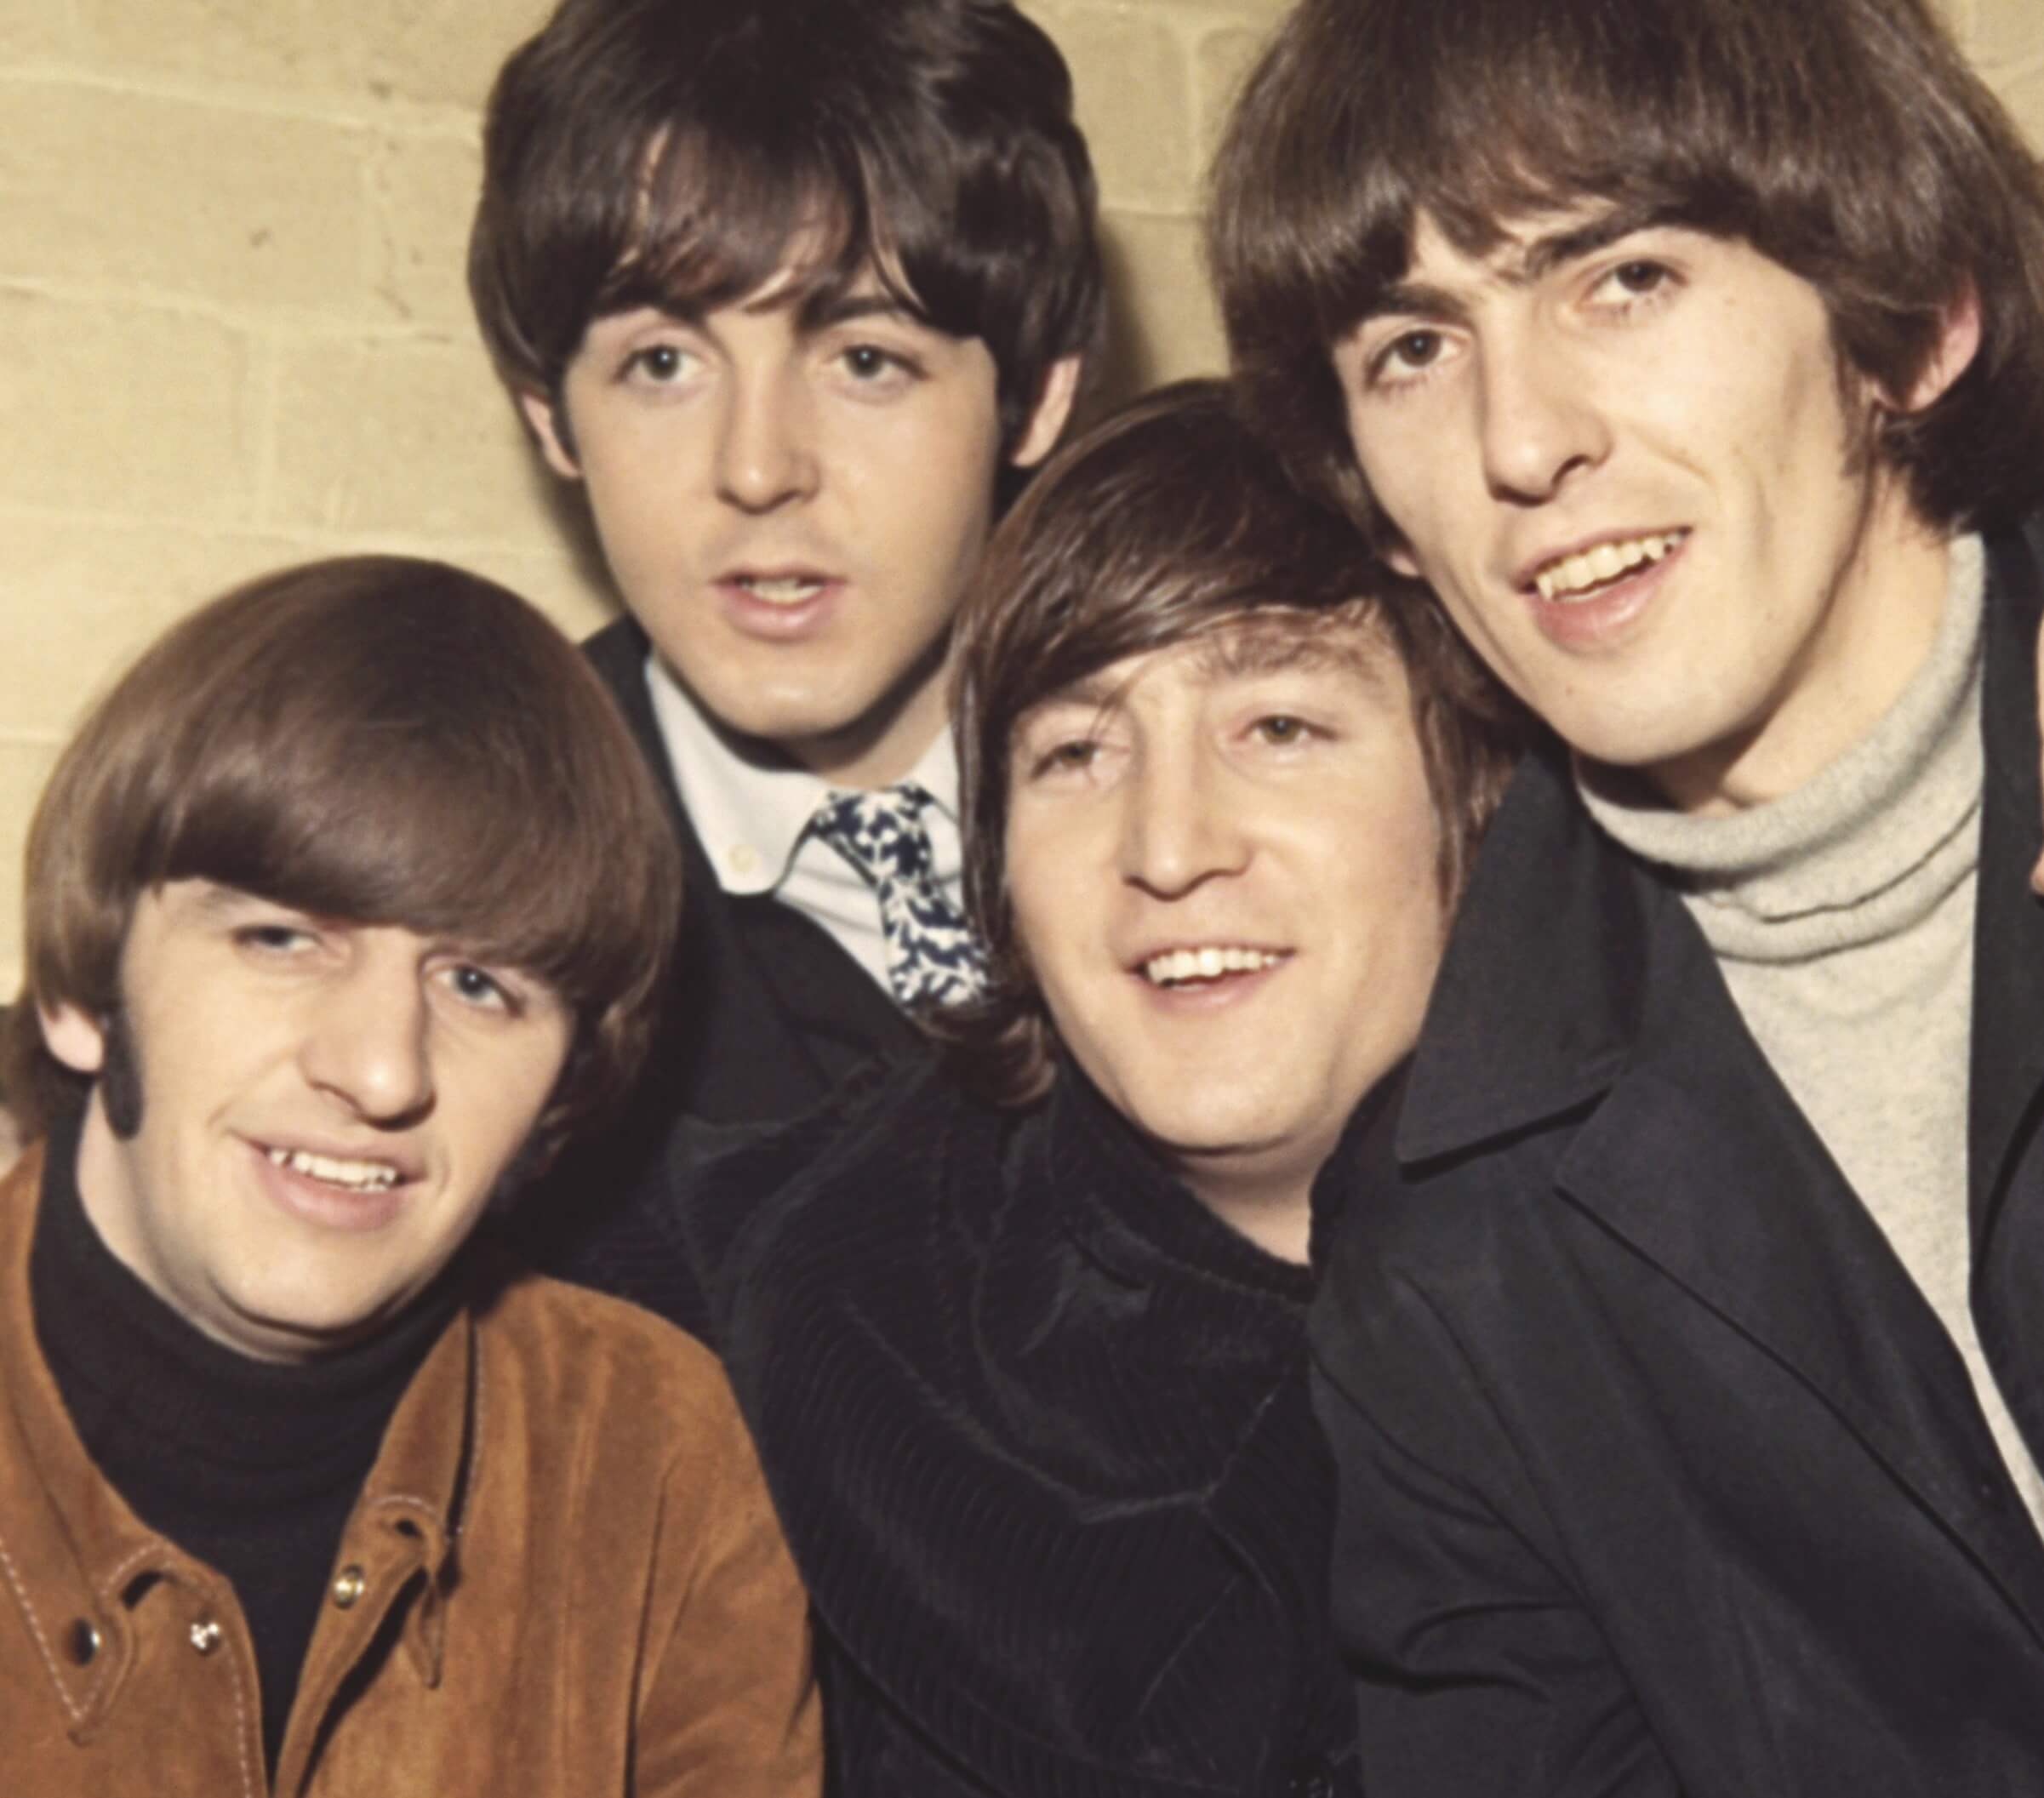 You are currently viewing One of The Beatles’ Biggest Hits Is Getting a New Visual—Nearly 55 Years Later